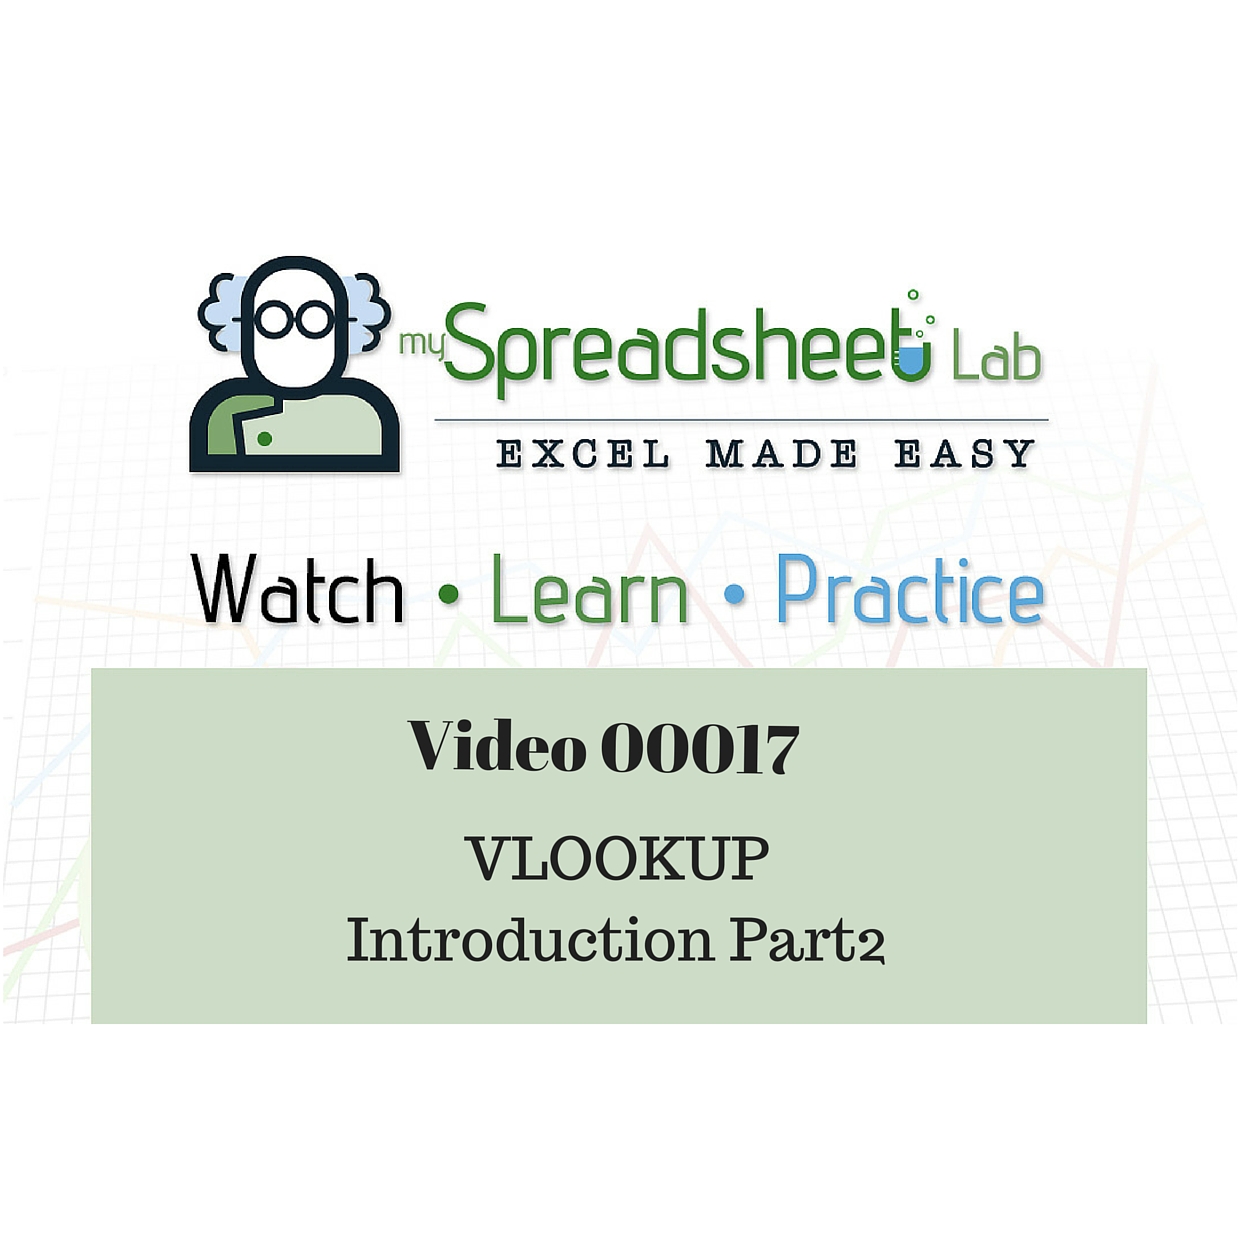 Video 00017 VLOOKUP Introduction Part2